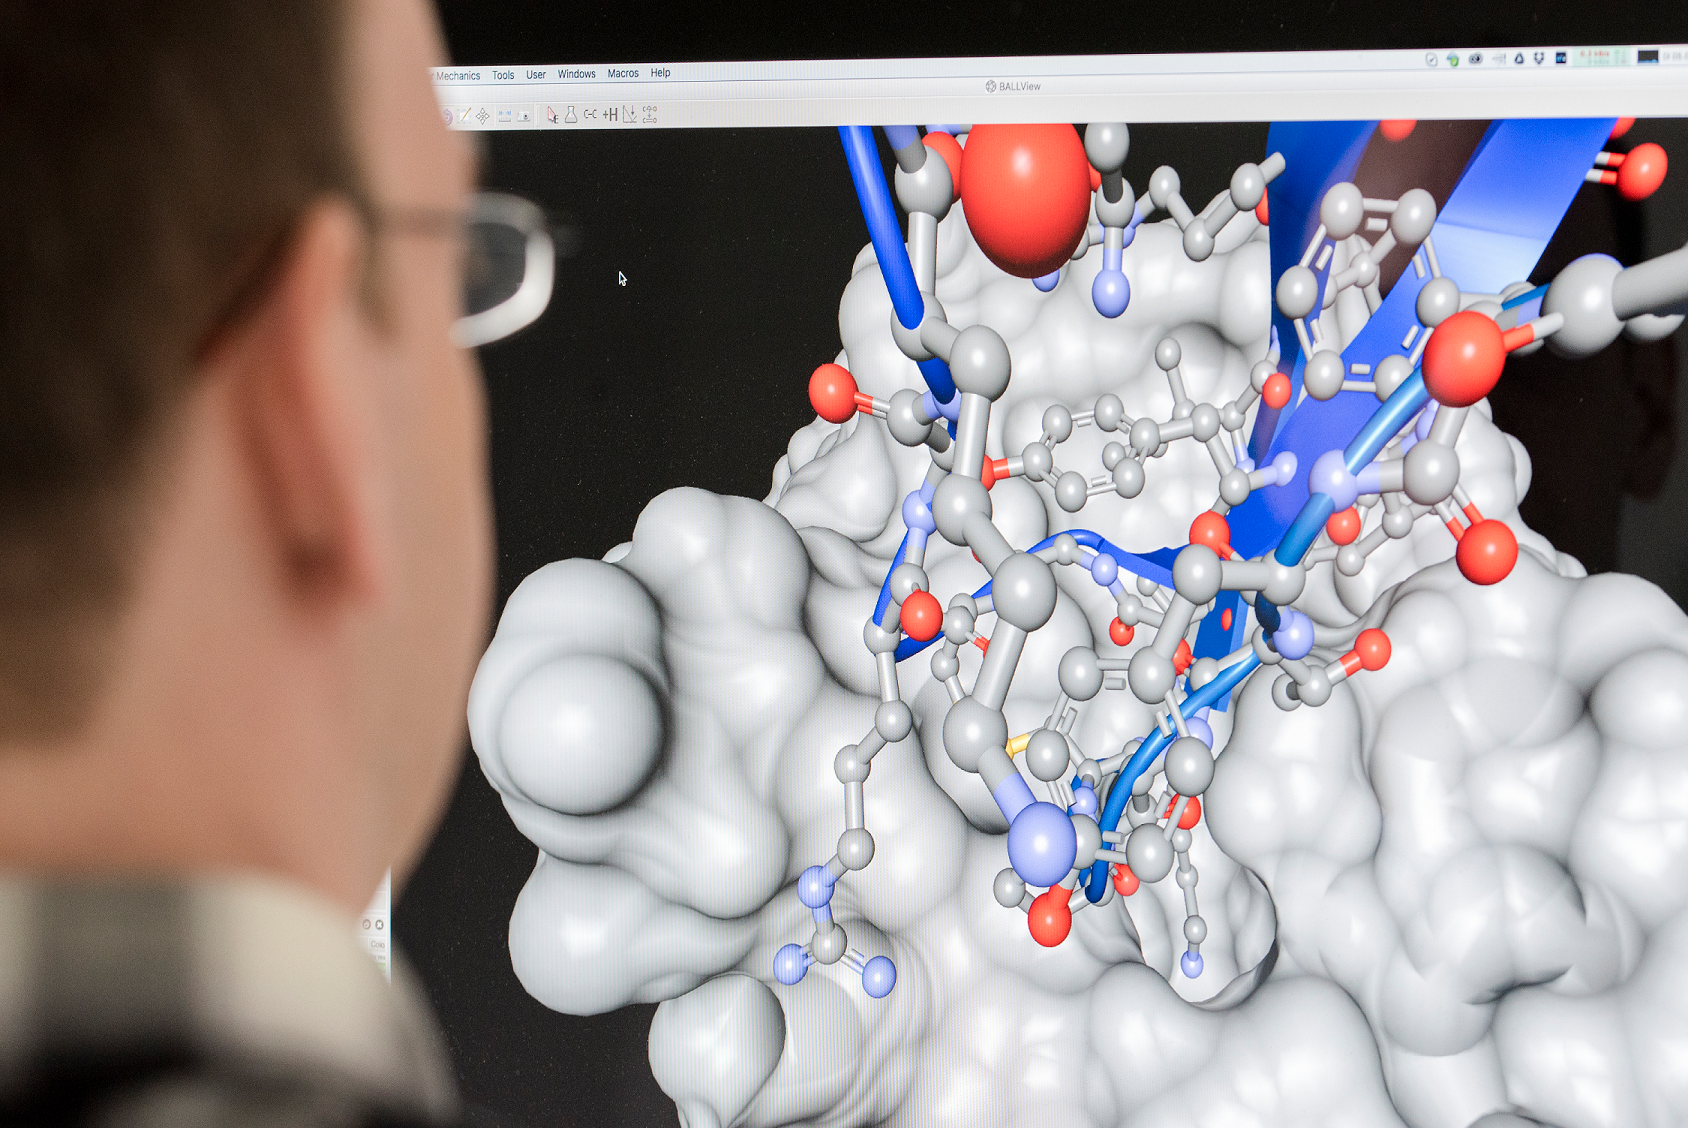 The head of a scientist in front of a computer screen showing a molecule model.